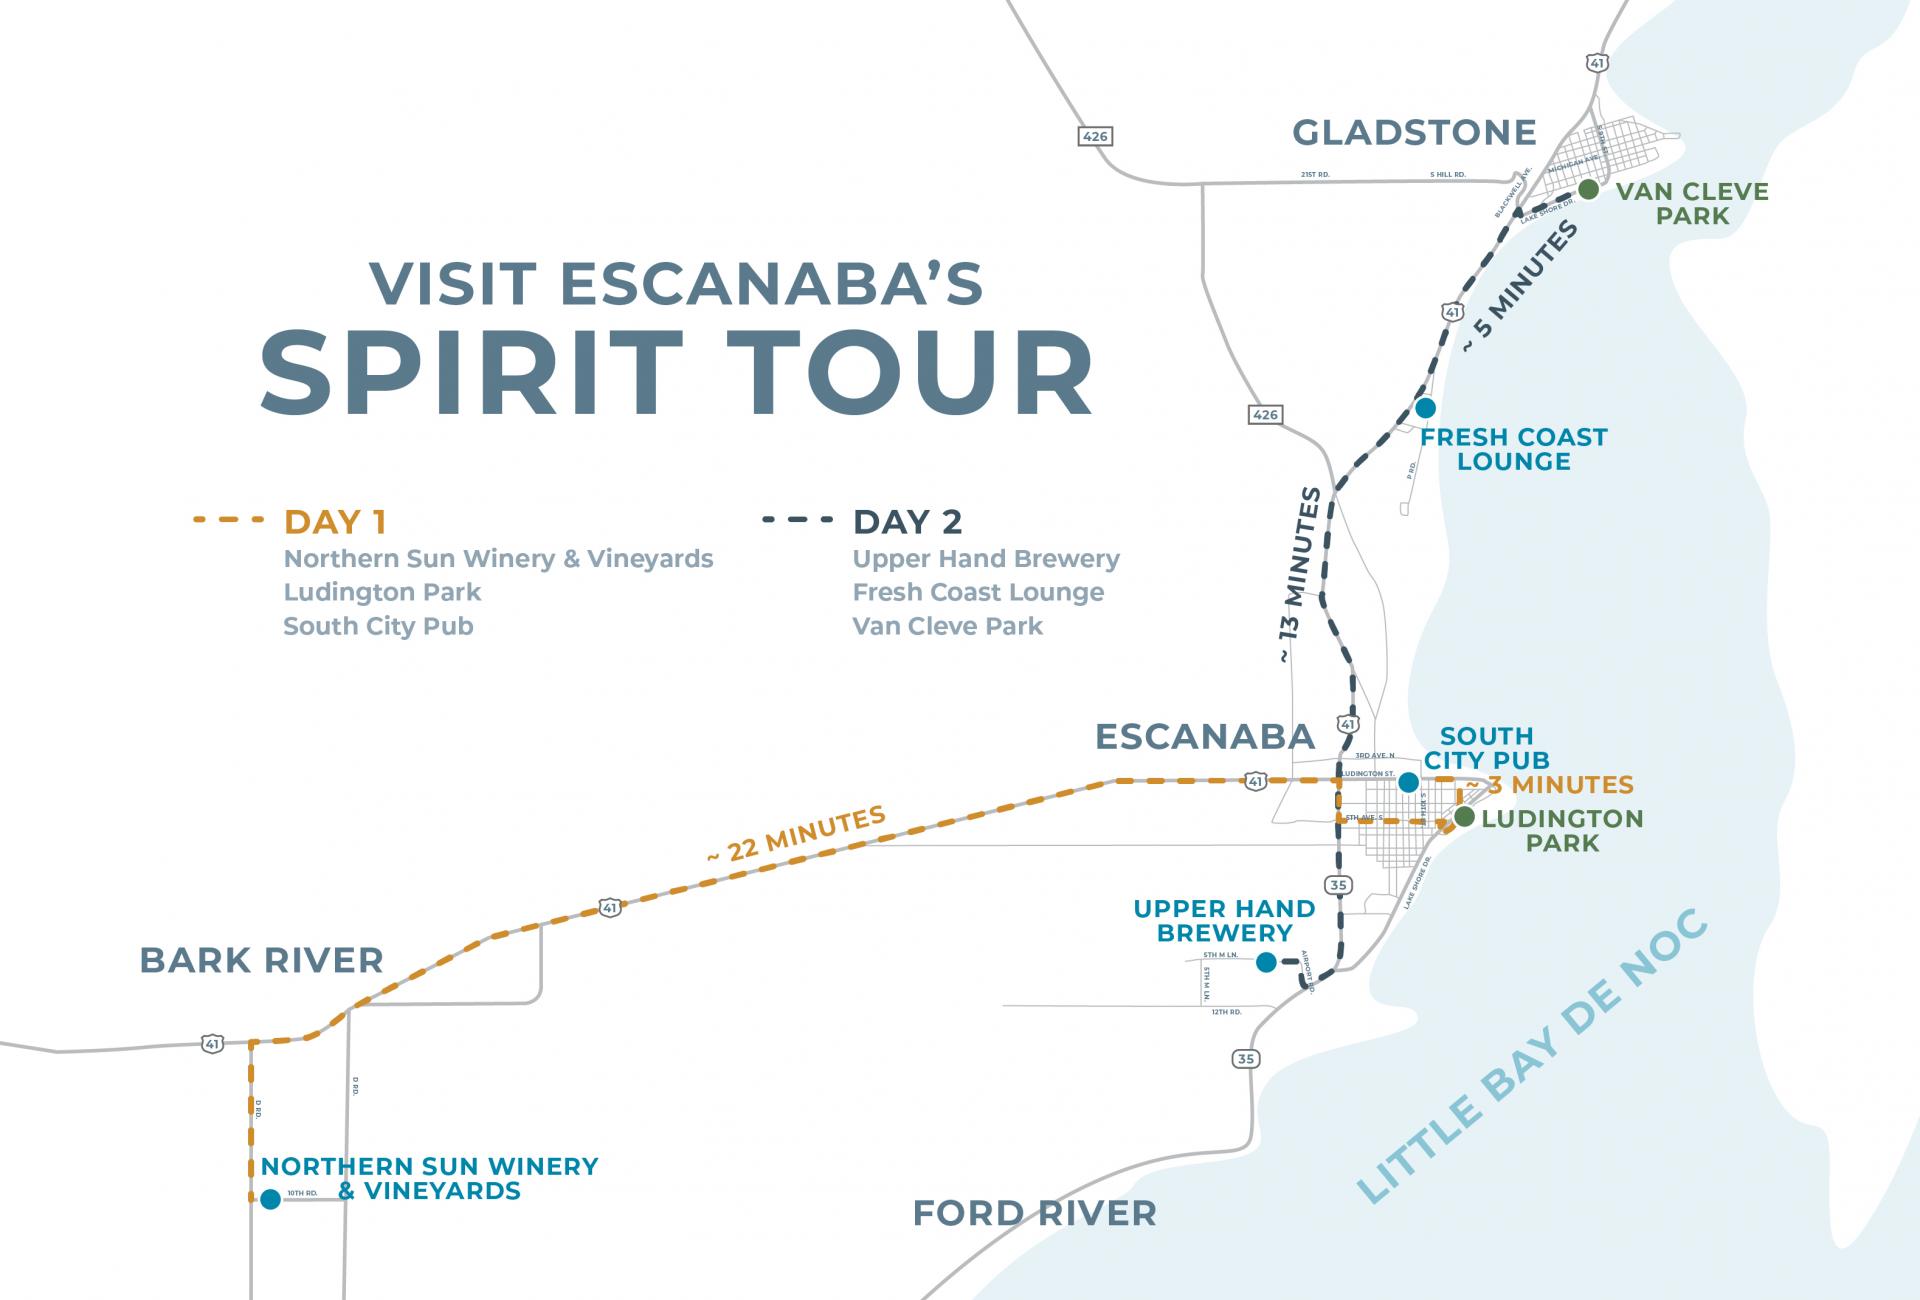 Map of locations along the Escanaba Spirit Tour